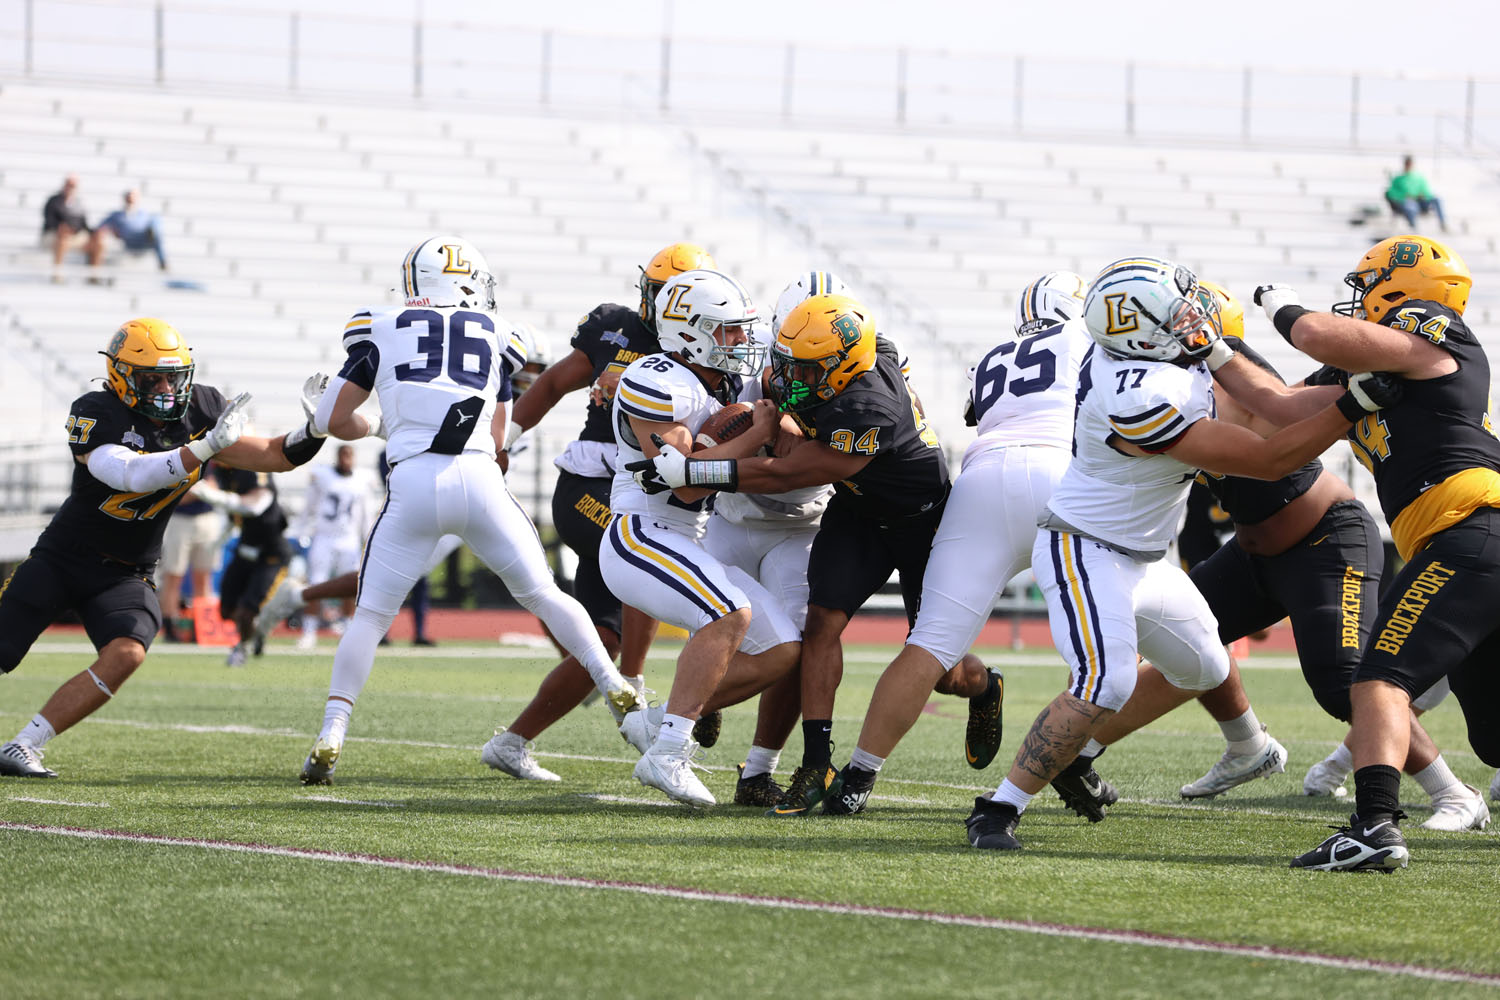 Brockport defense stuffing the run by Lycoming